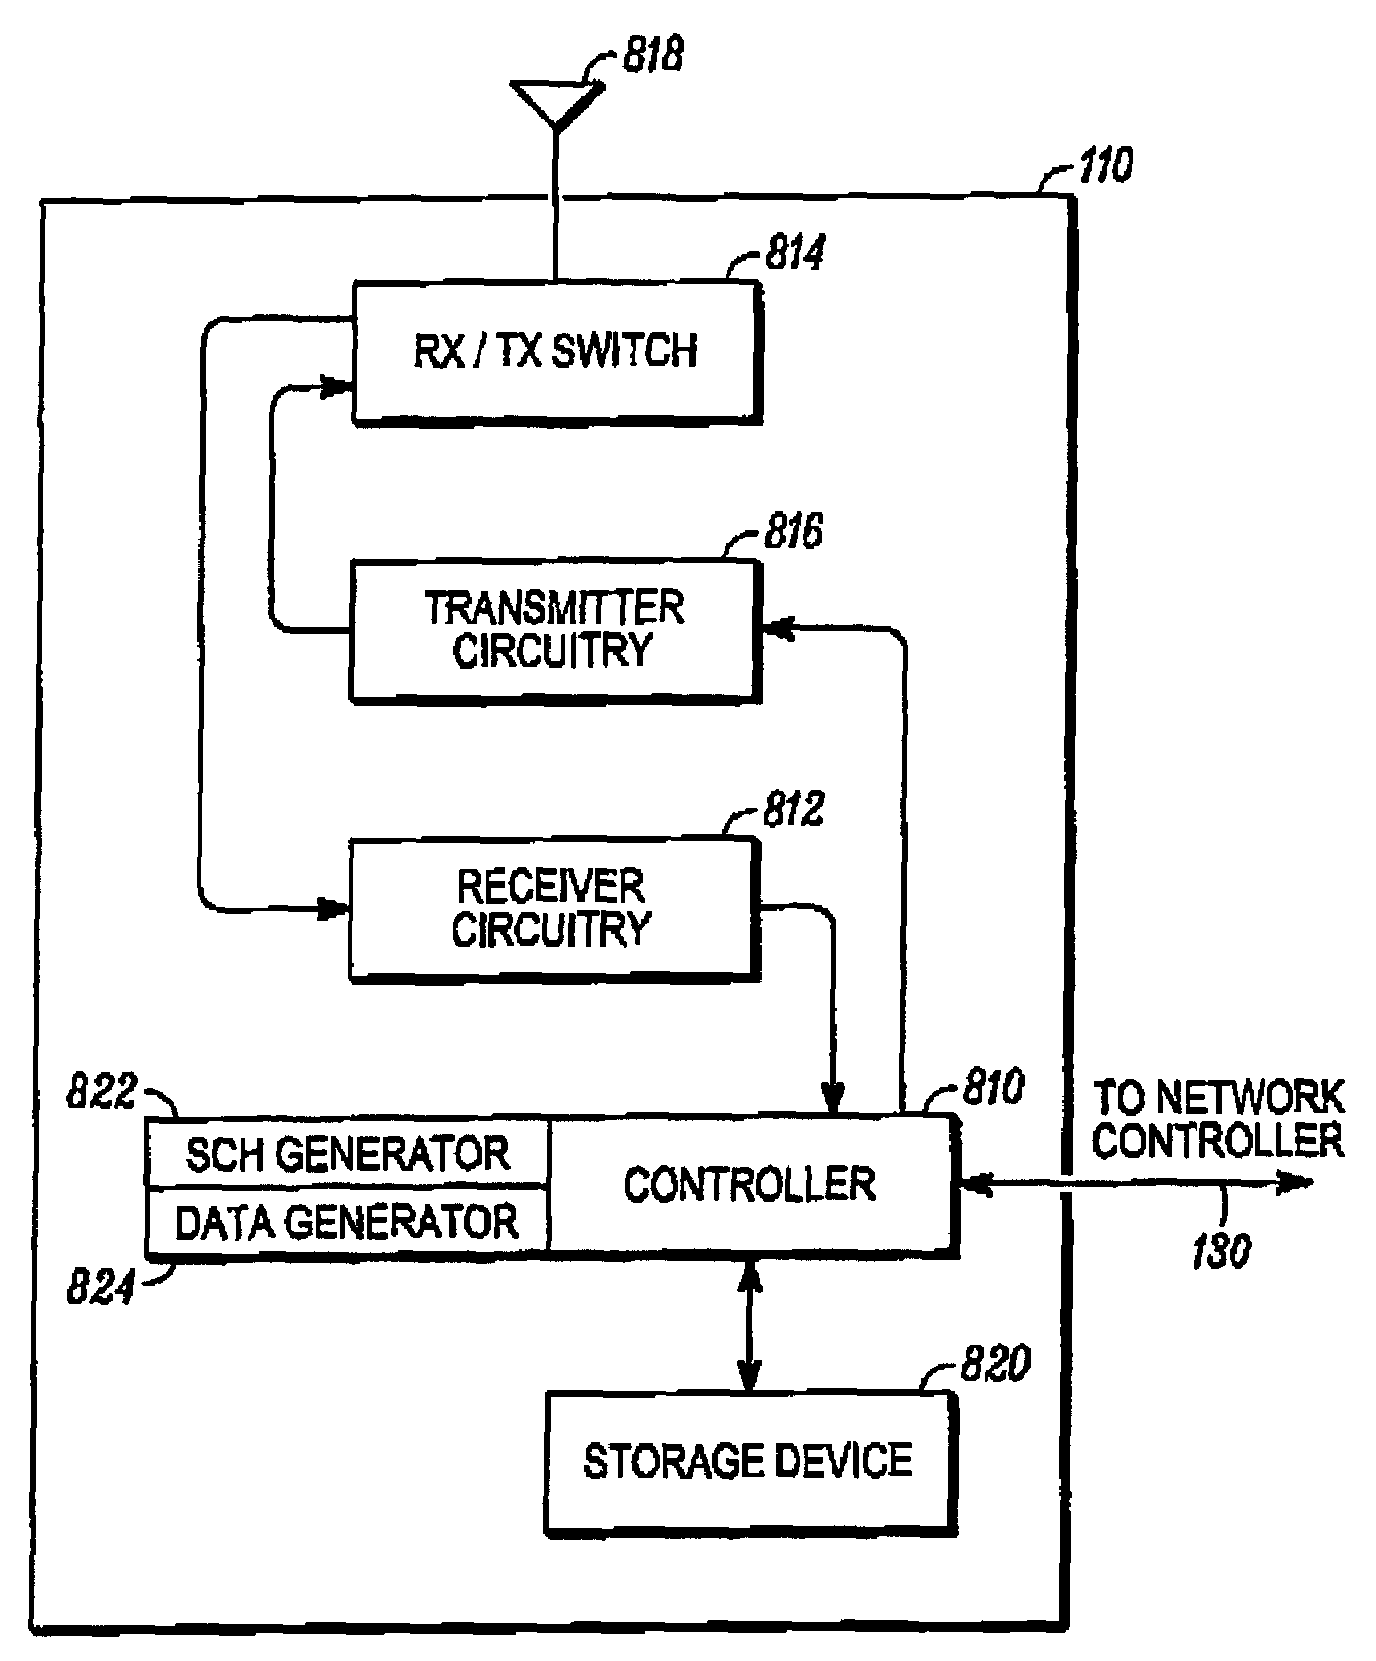 Method and apparatus for a synchronization channel in an OFDMA system